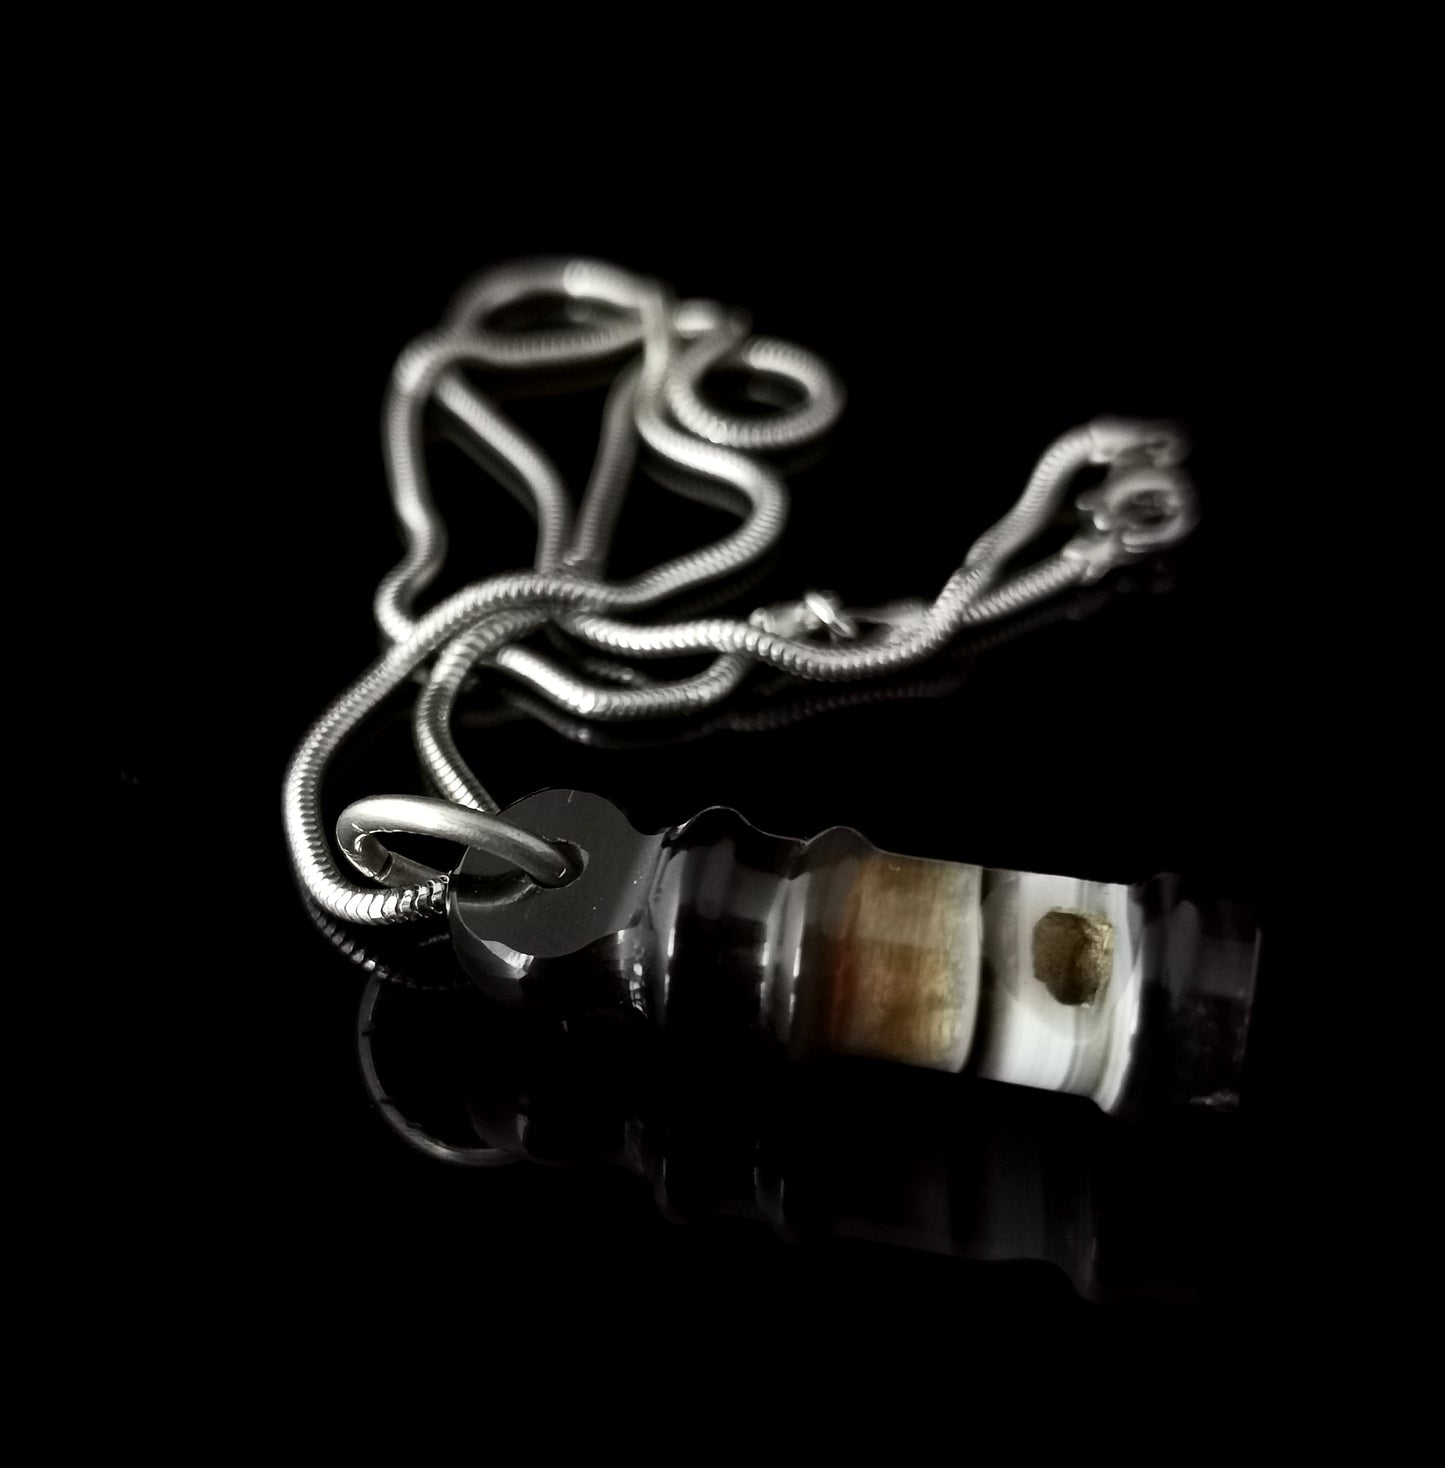 Victorian banded agate whistle pendant, silver necklace